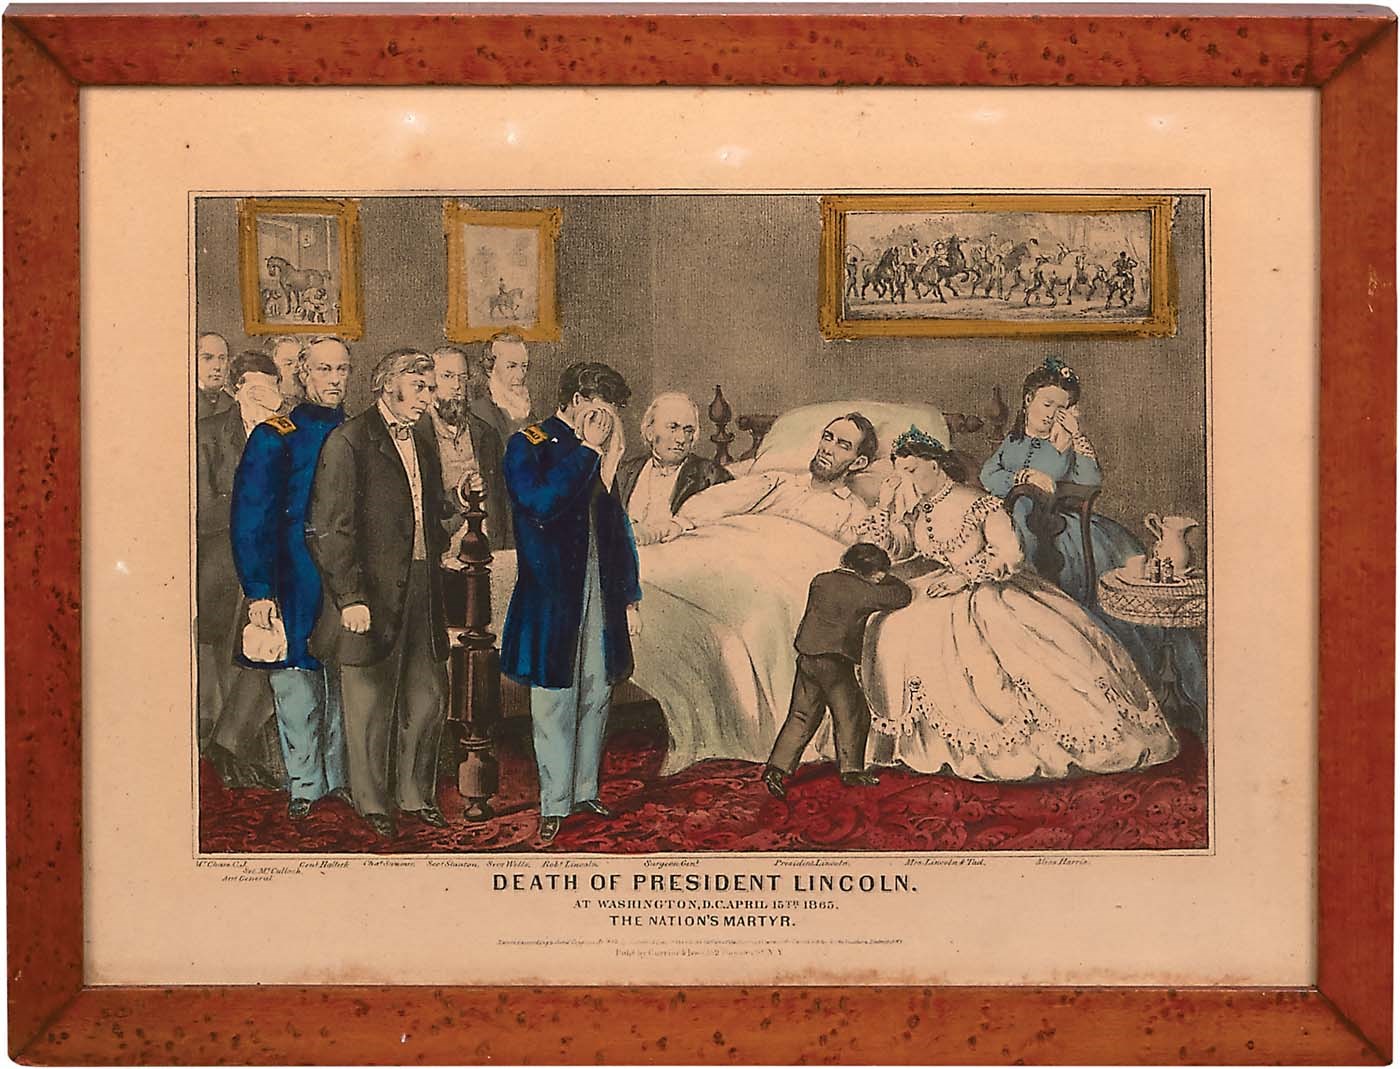 - 1865 "Death of President Lincoln" by Currier & Ives